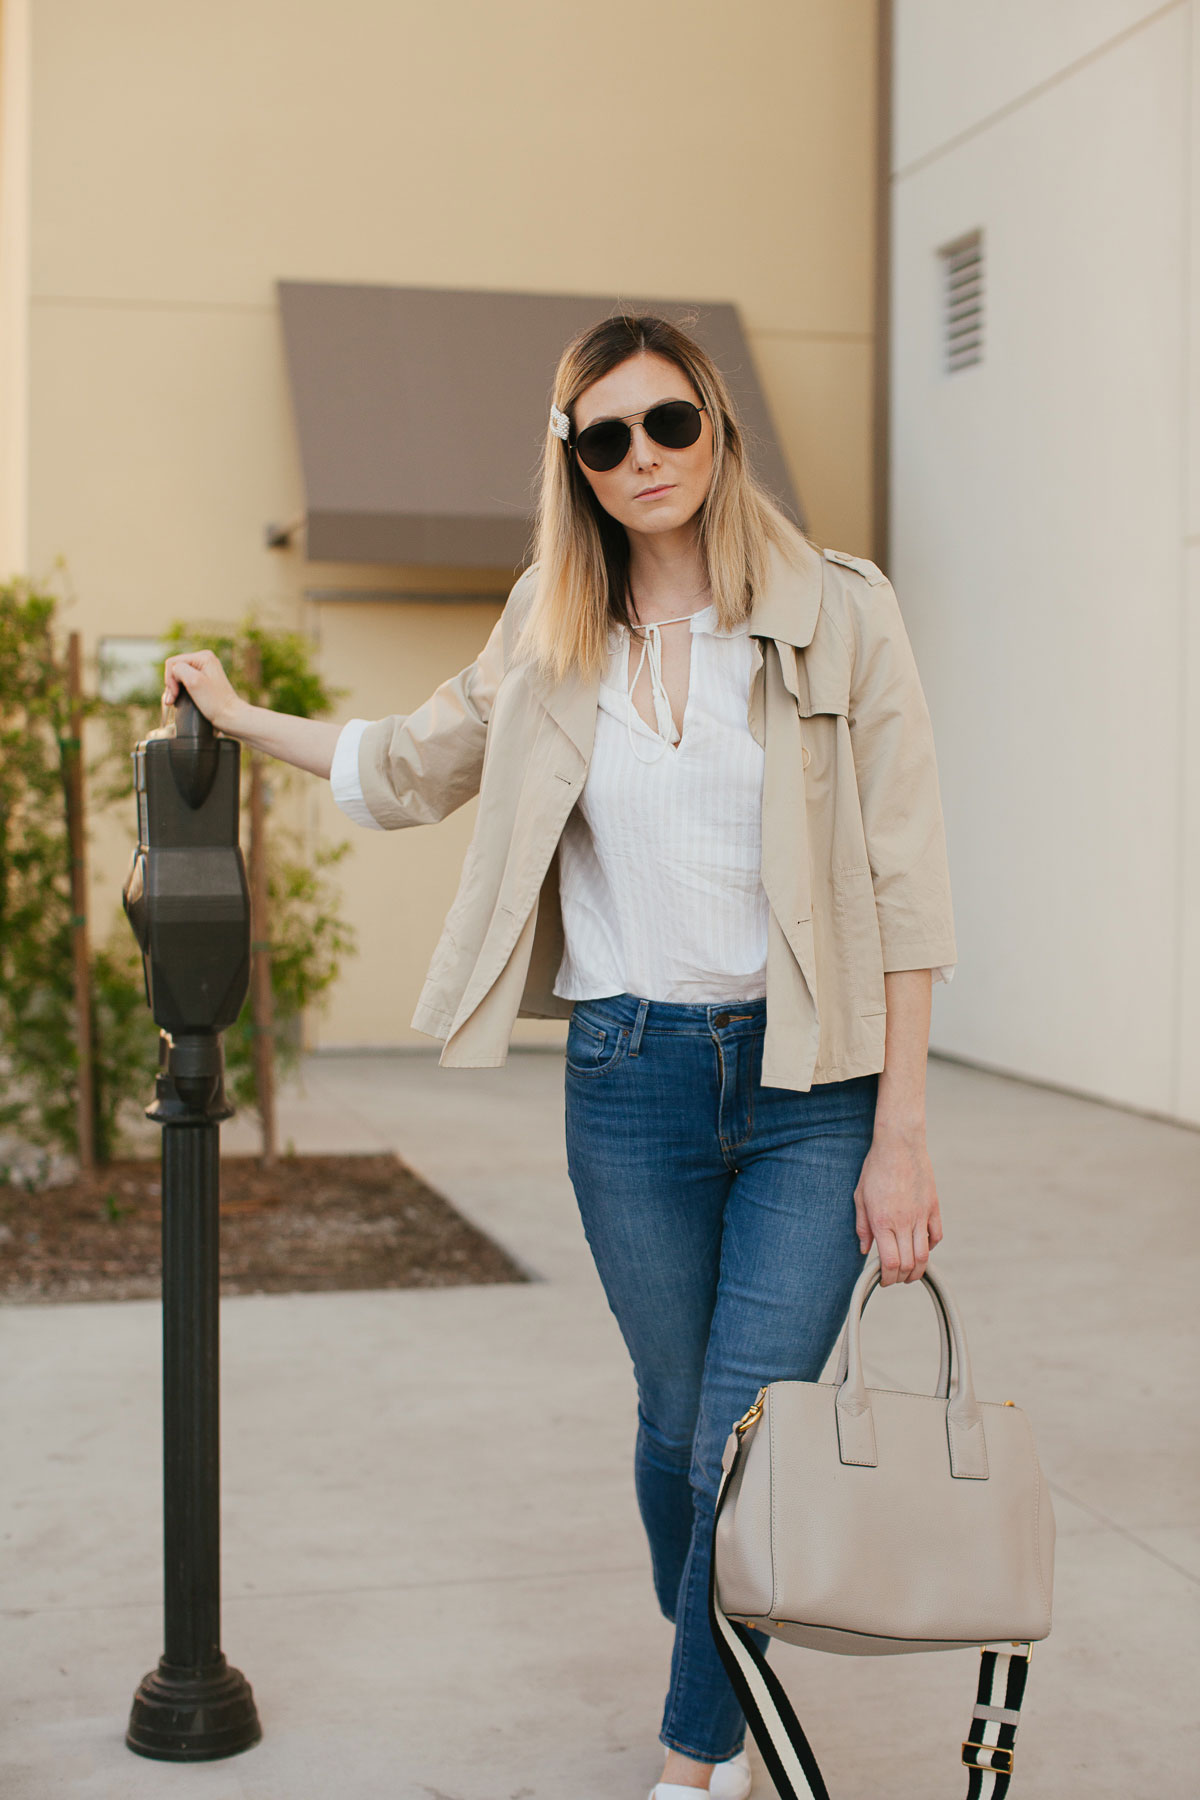 Simple neutral outfit